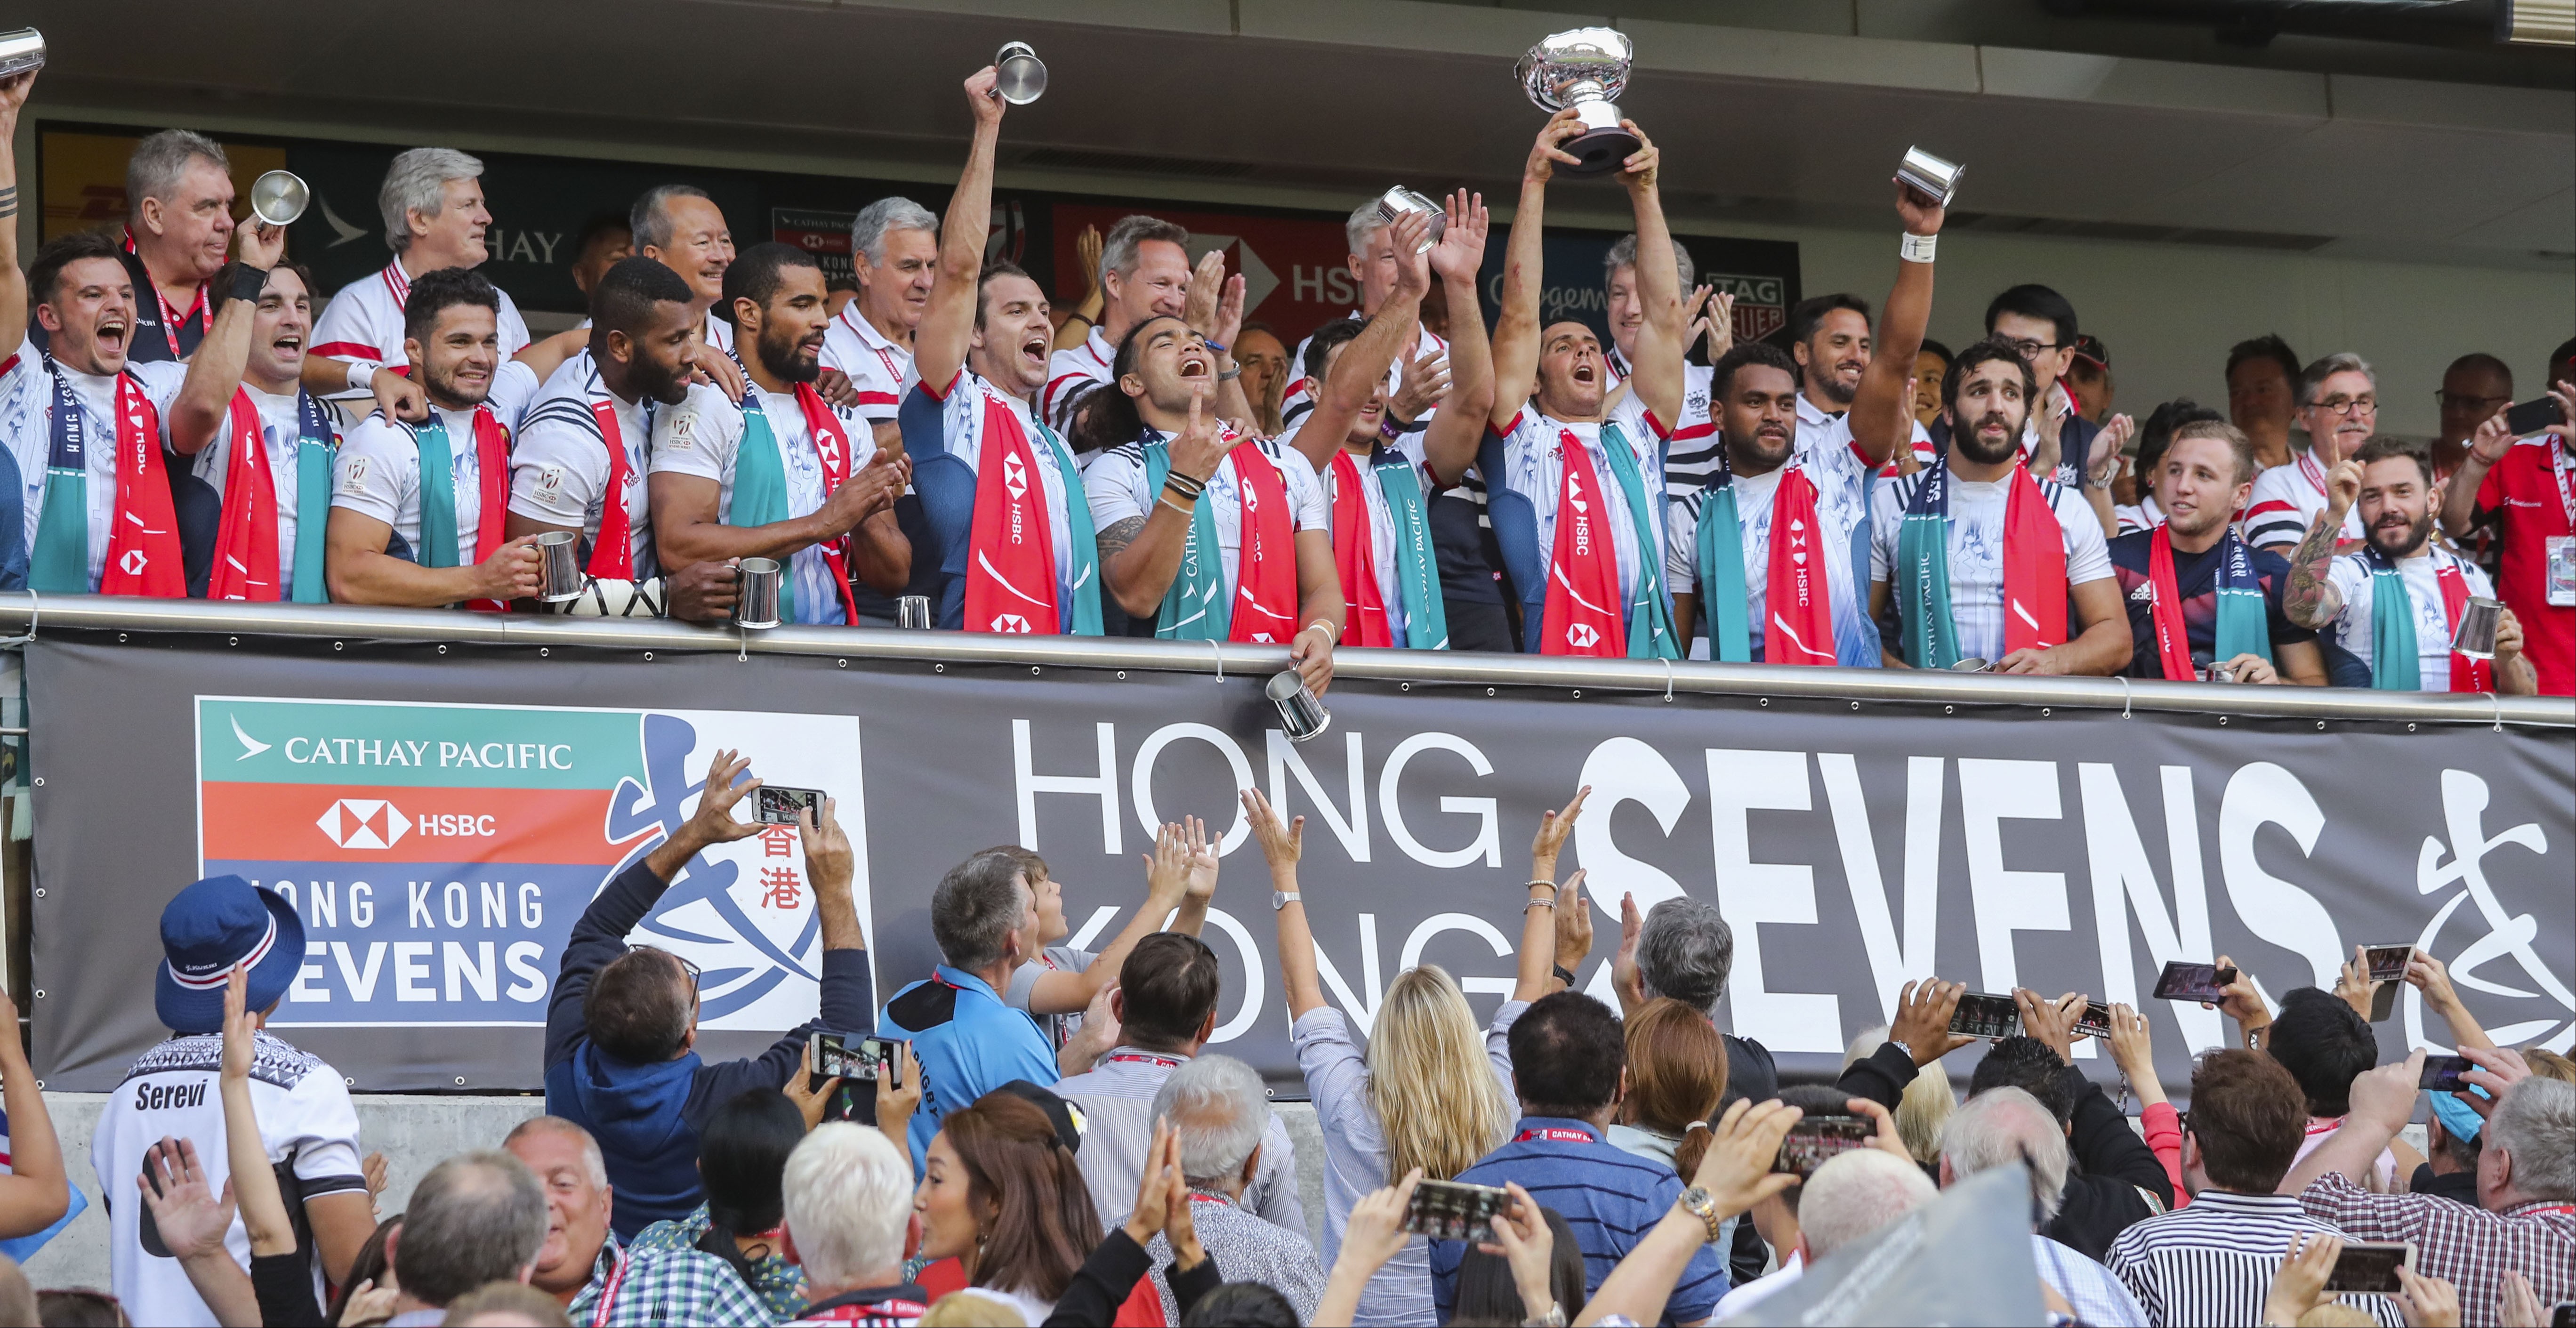 France celebrate at the trophy presentation after beating Canada in the Bowl final in Hong Kong. Photo: K.Y. Cheng